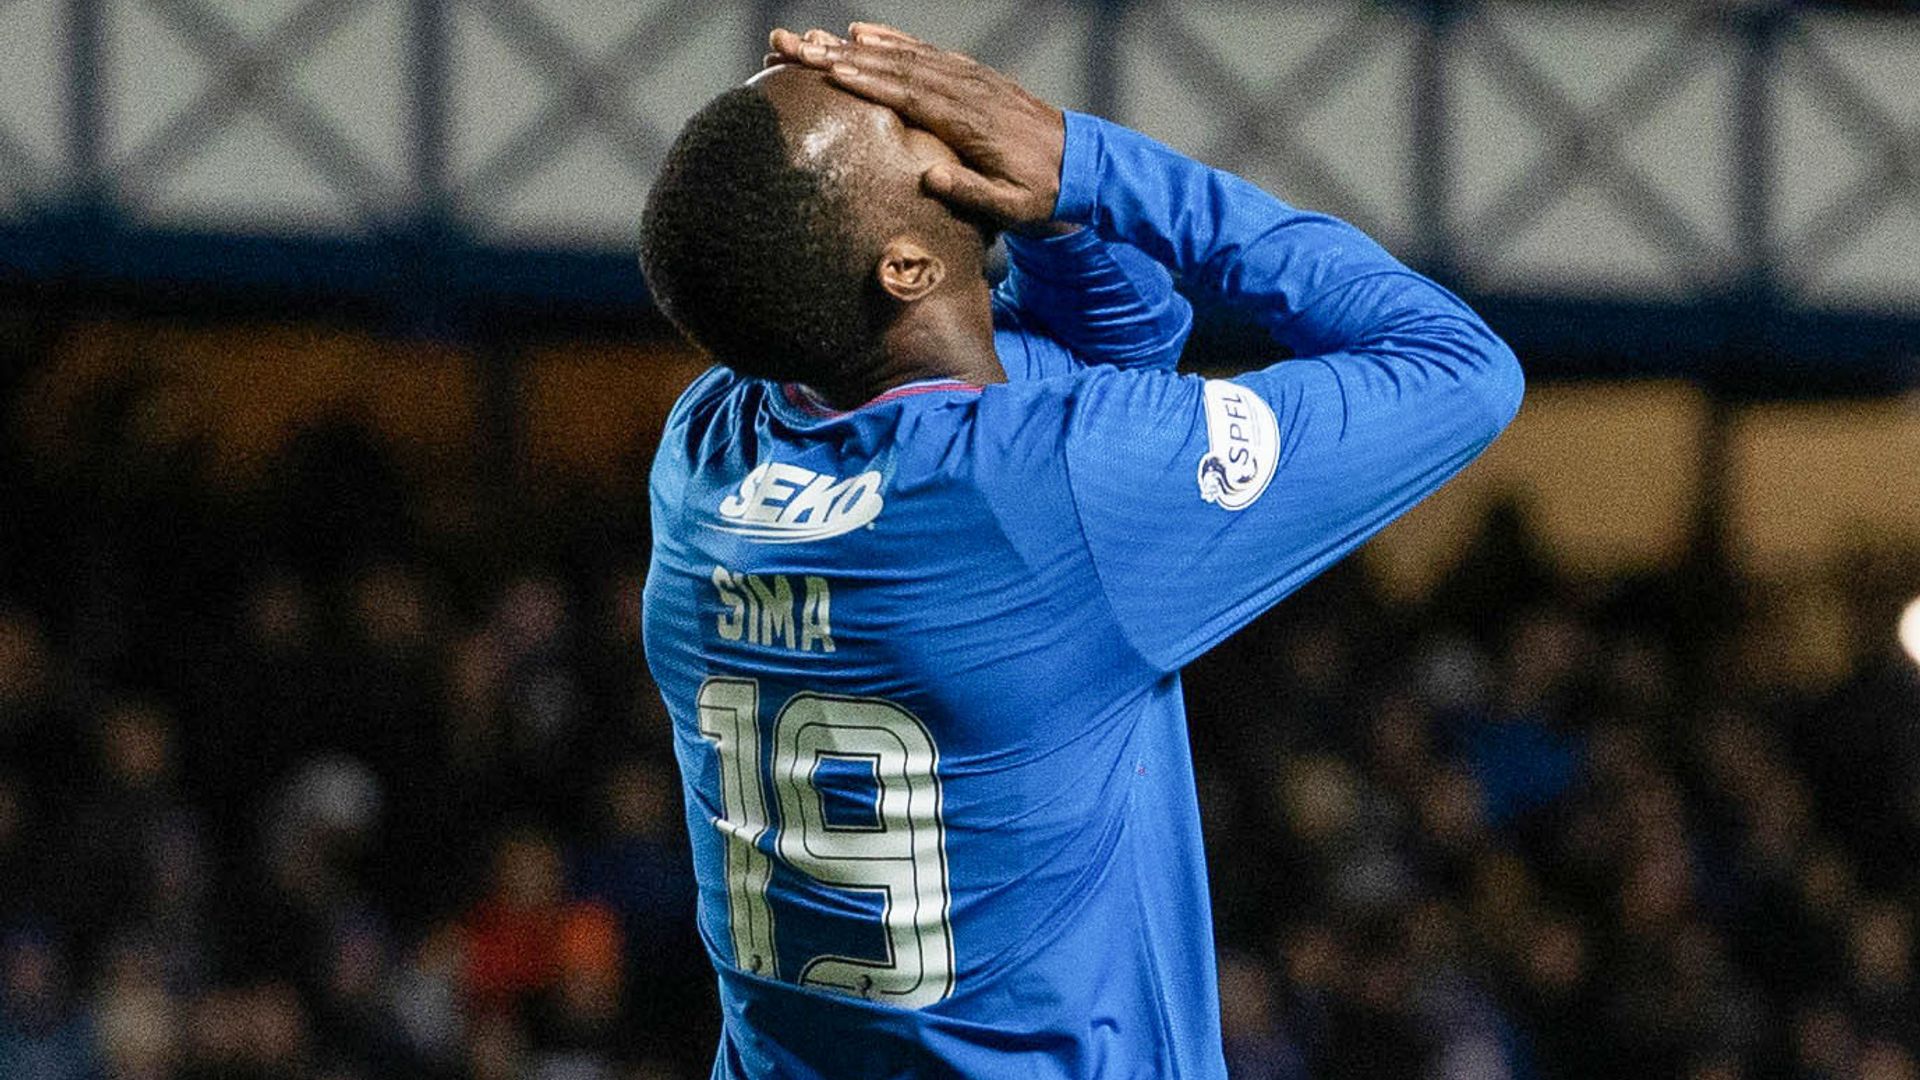 Rangers striker Sima out 'long term' after AFCON injury